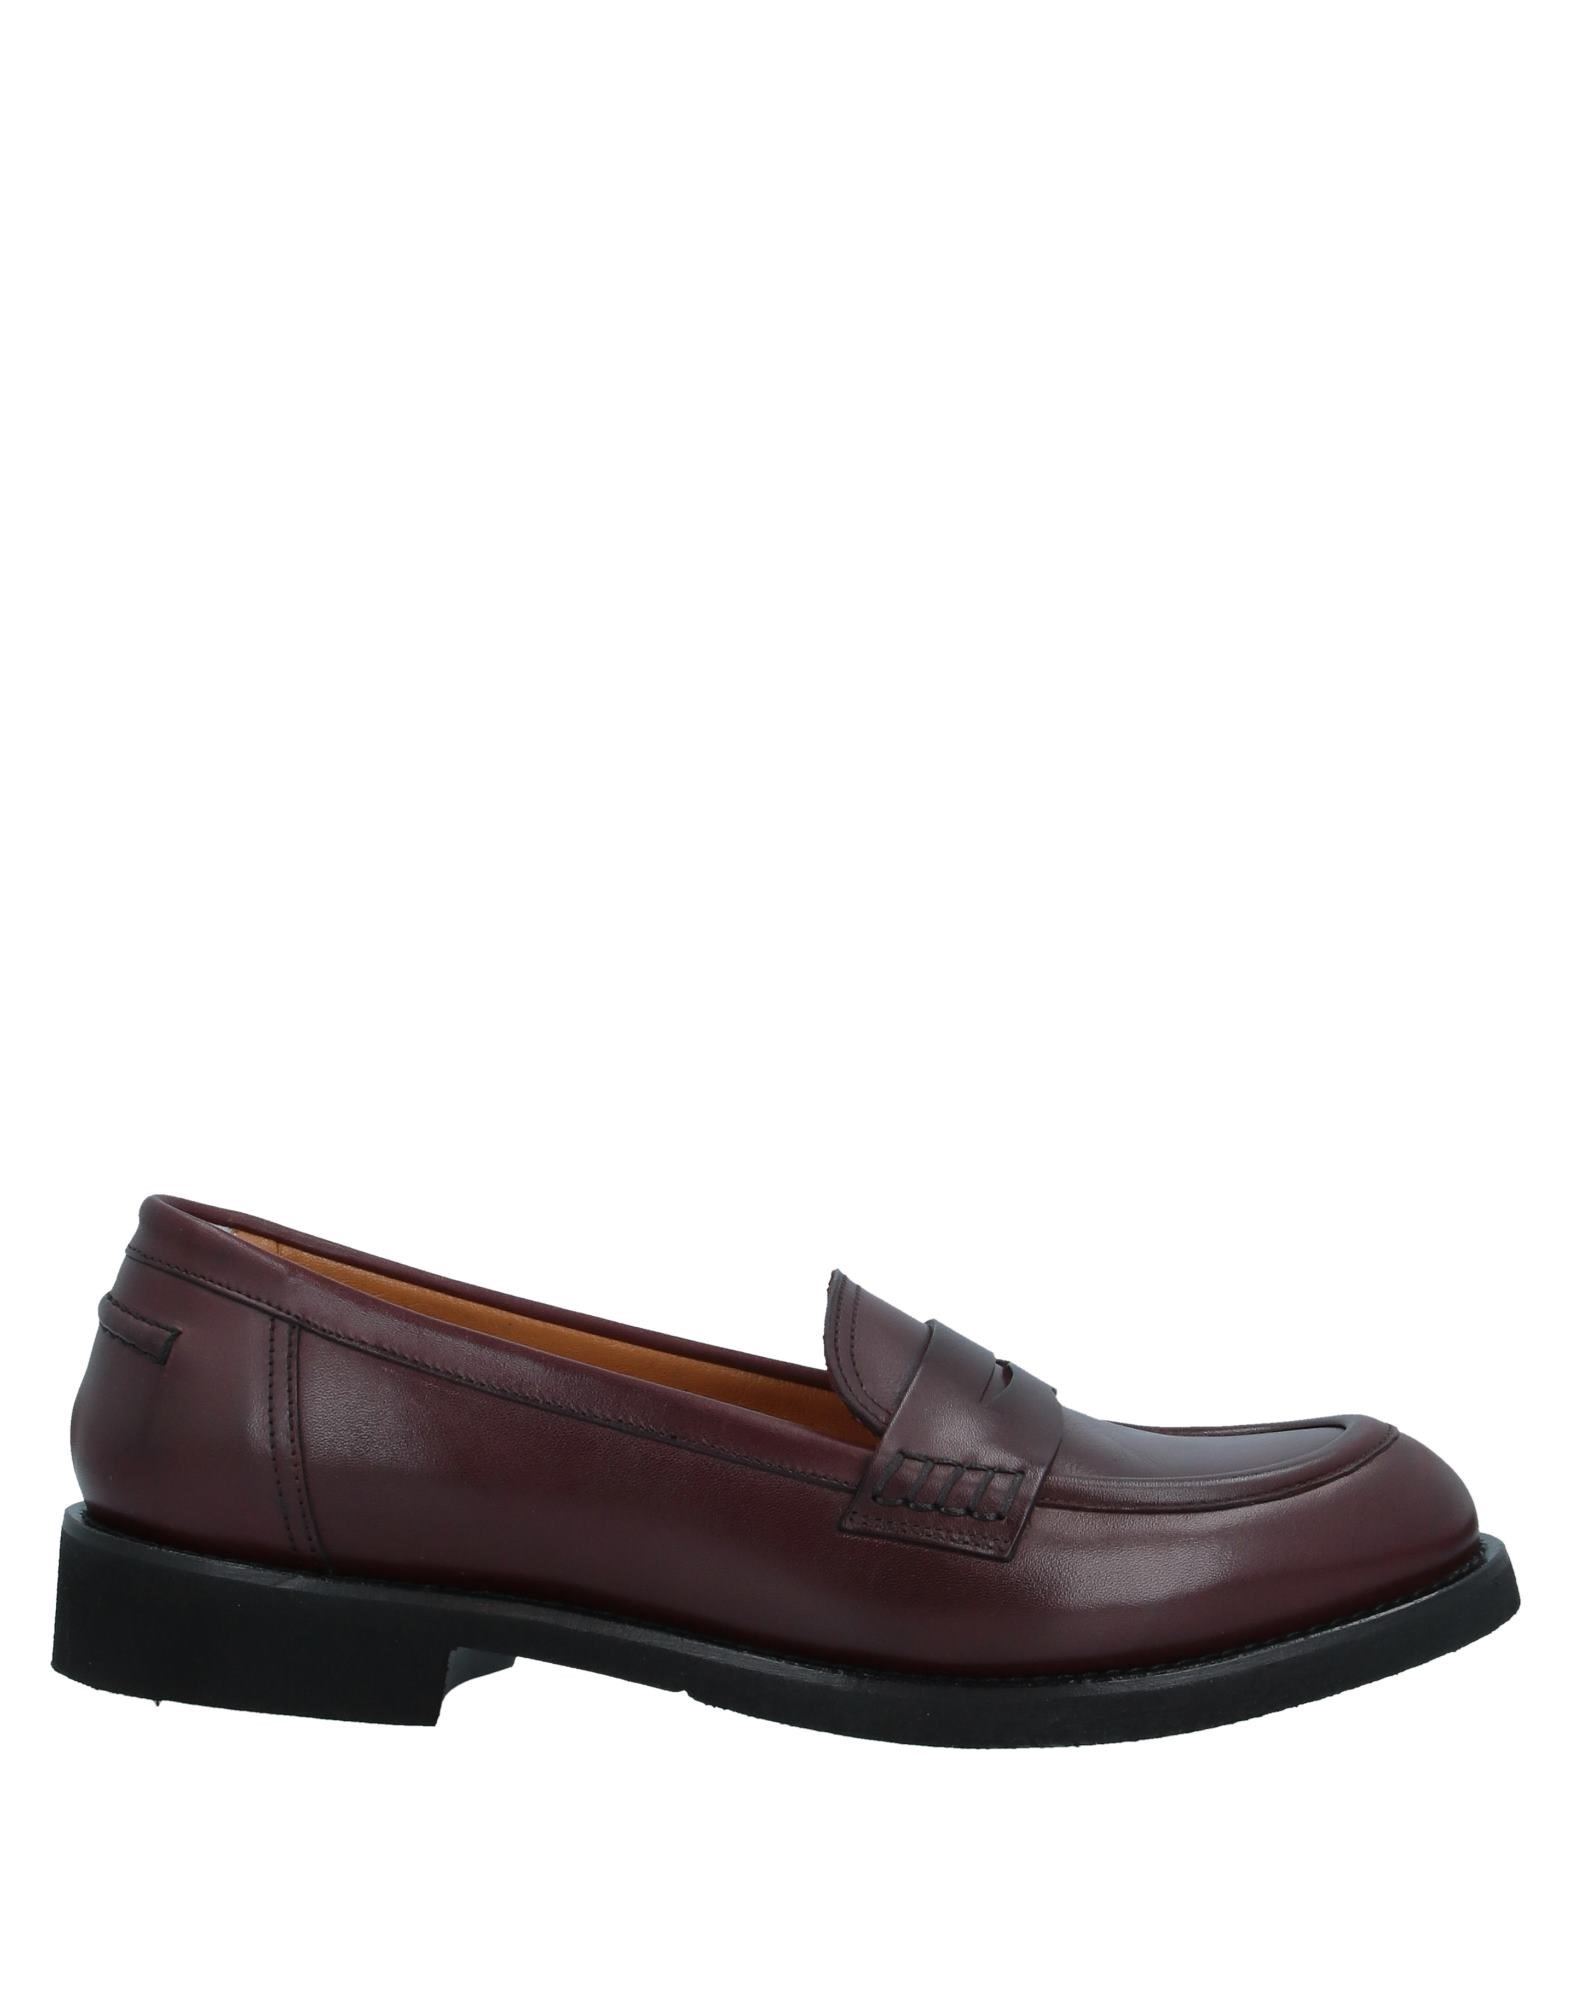 JUST MELLUSO Loafers